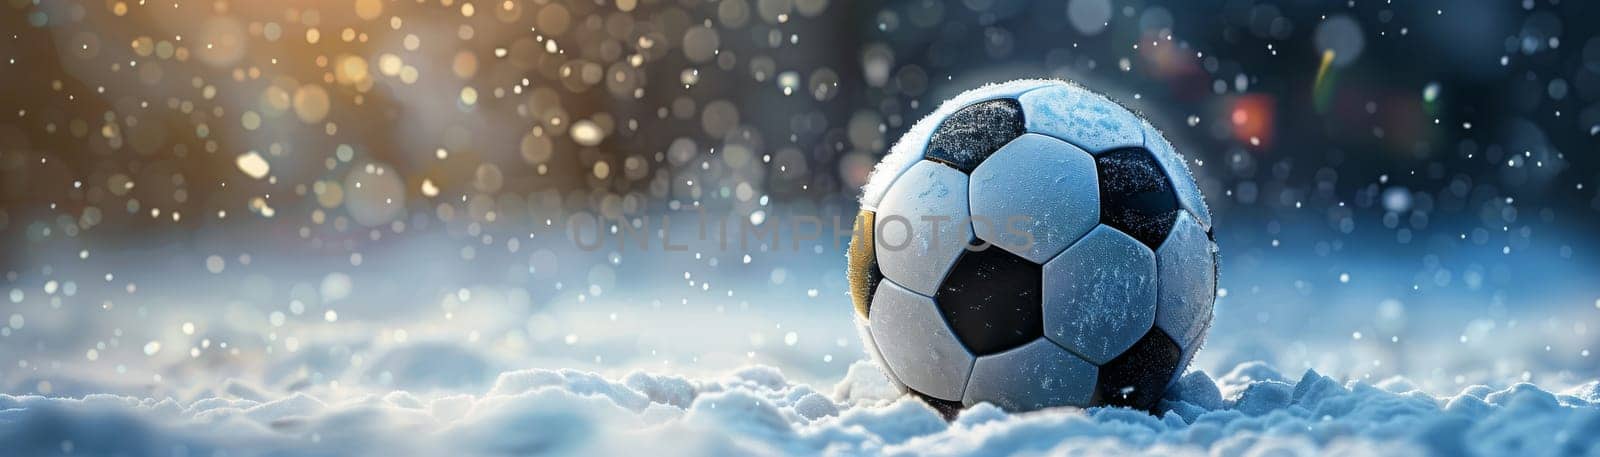 A soccer ball or football is sitting in the snow by itchaznong